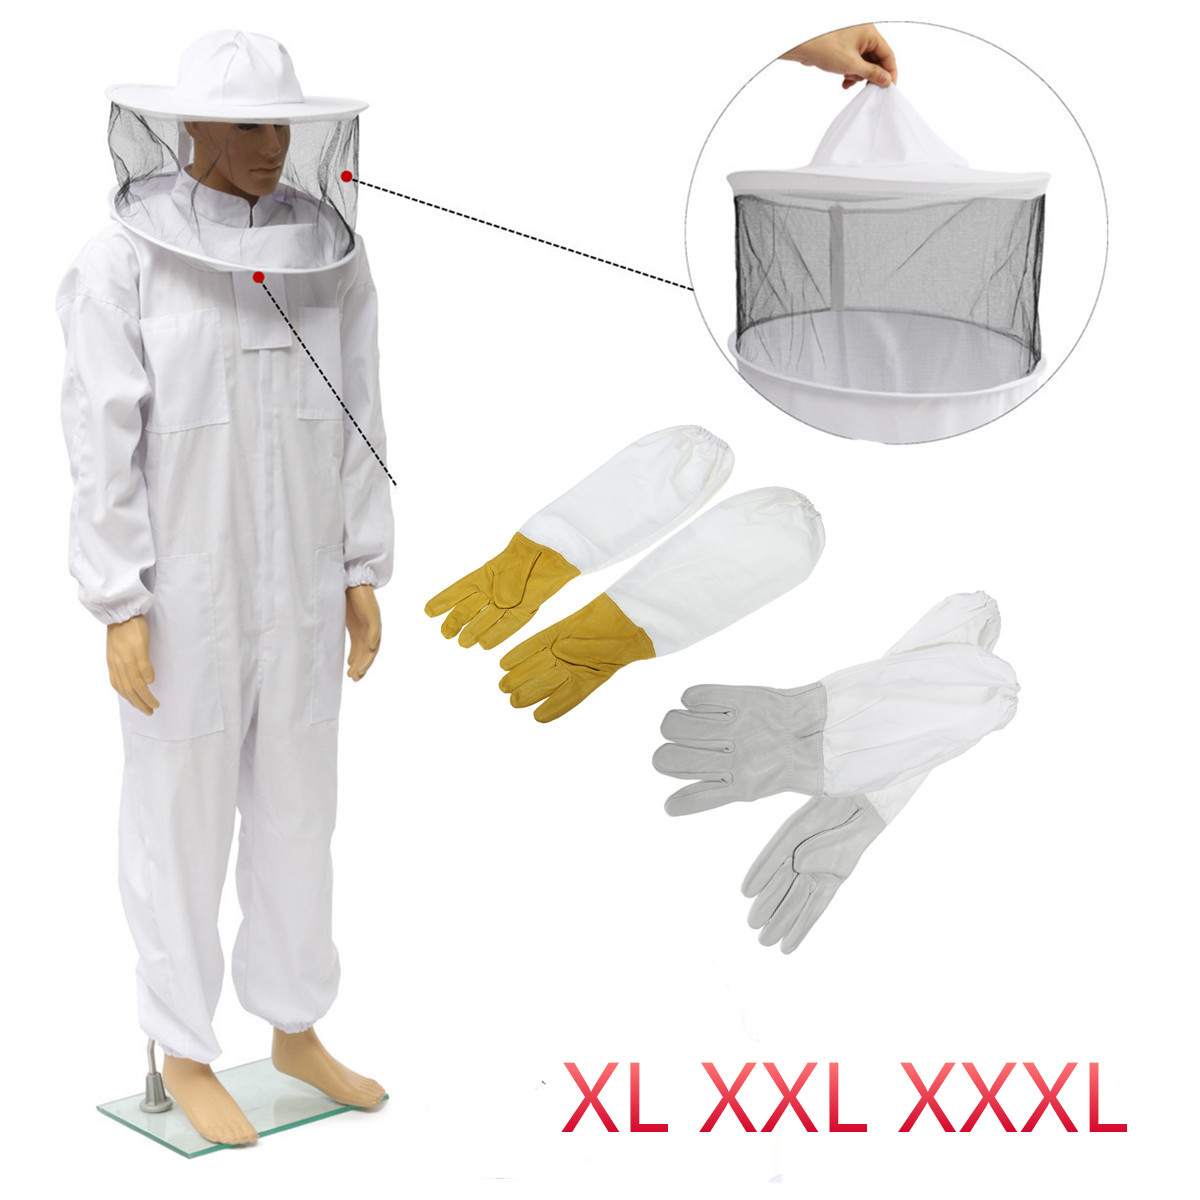 Beekeepers Bee Keeping Cotton Full Protector Suit With Veil Hat Hood Bee Suit XL XXL XXL 13